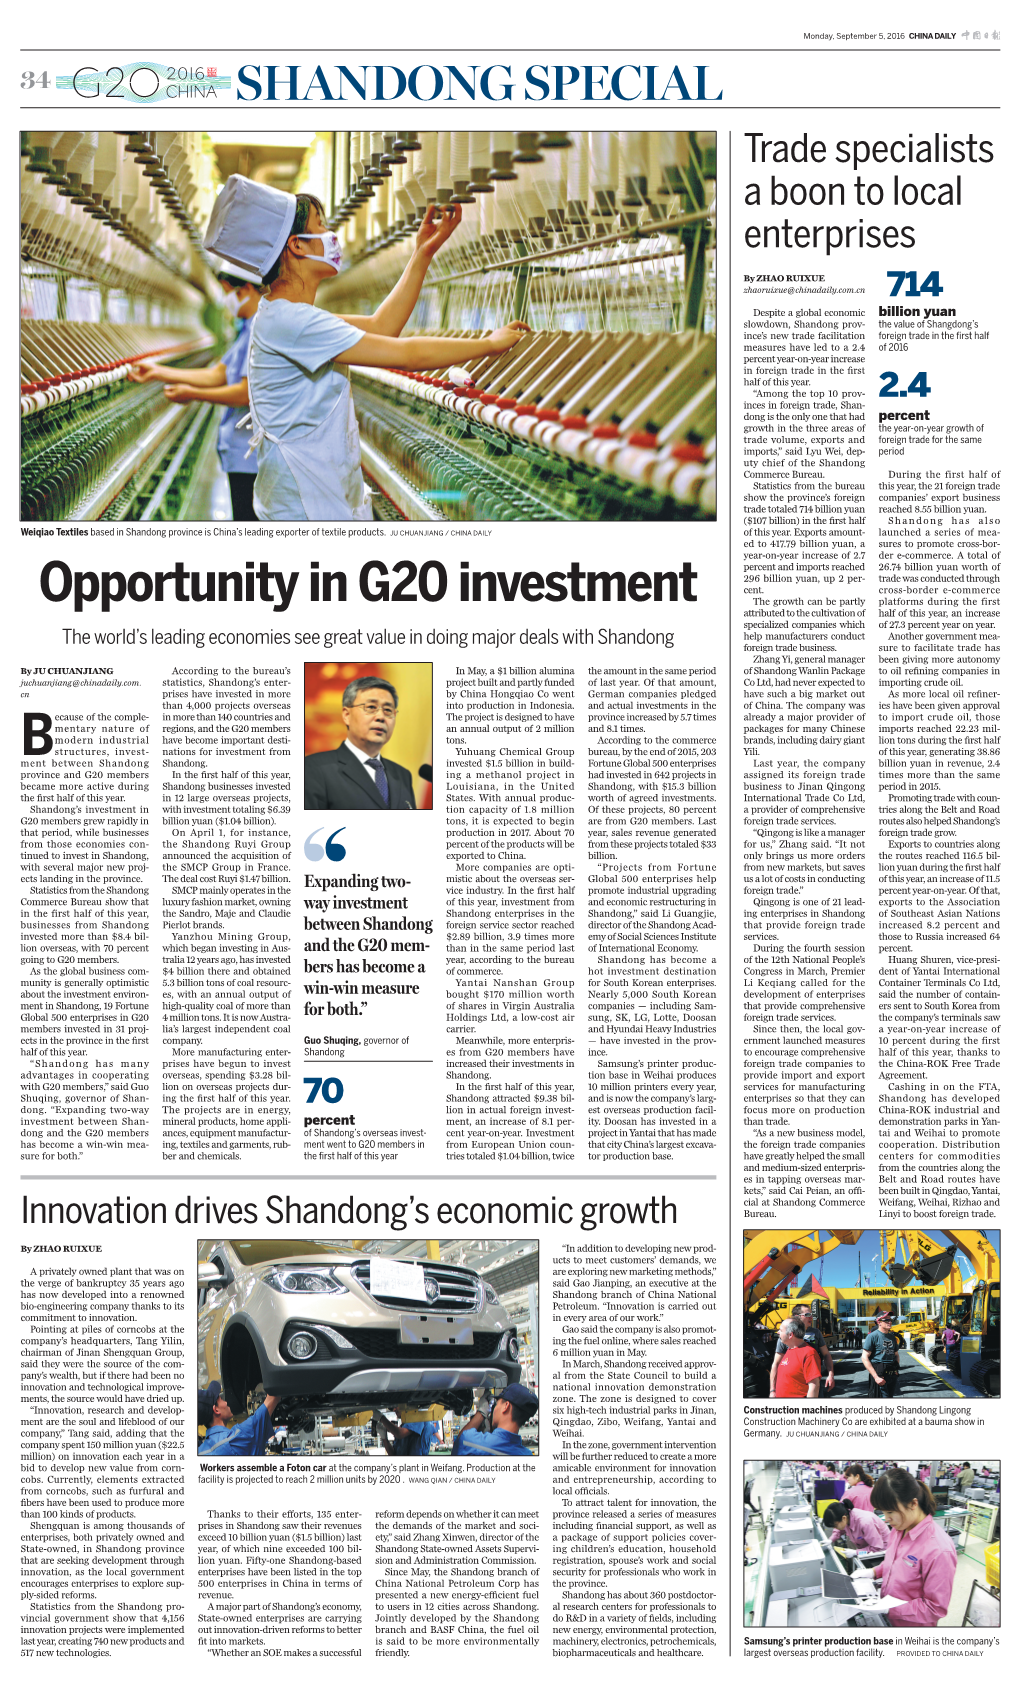 Opportunity in G20 Investment